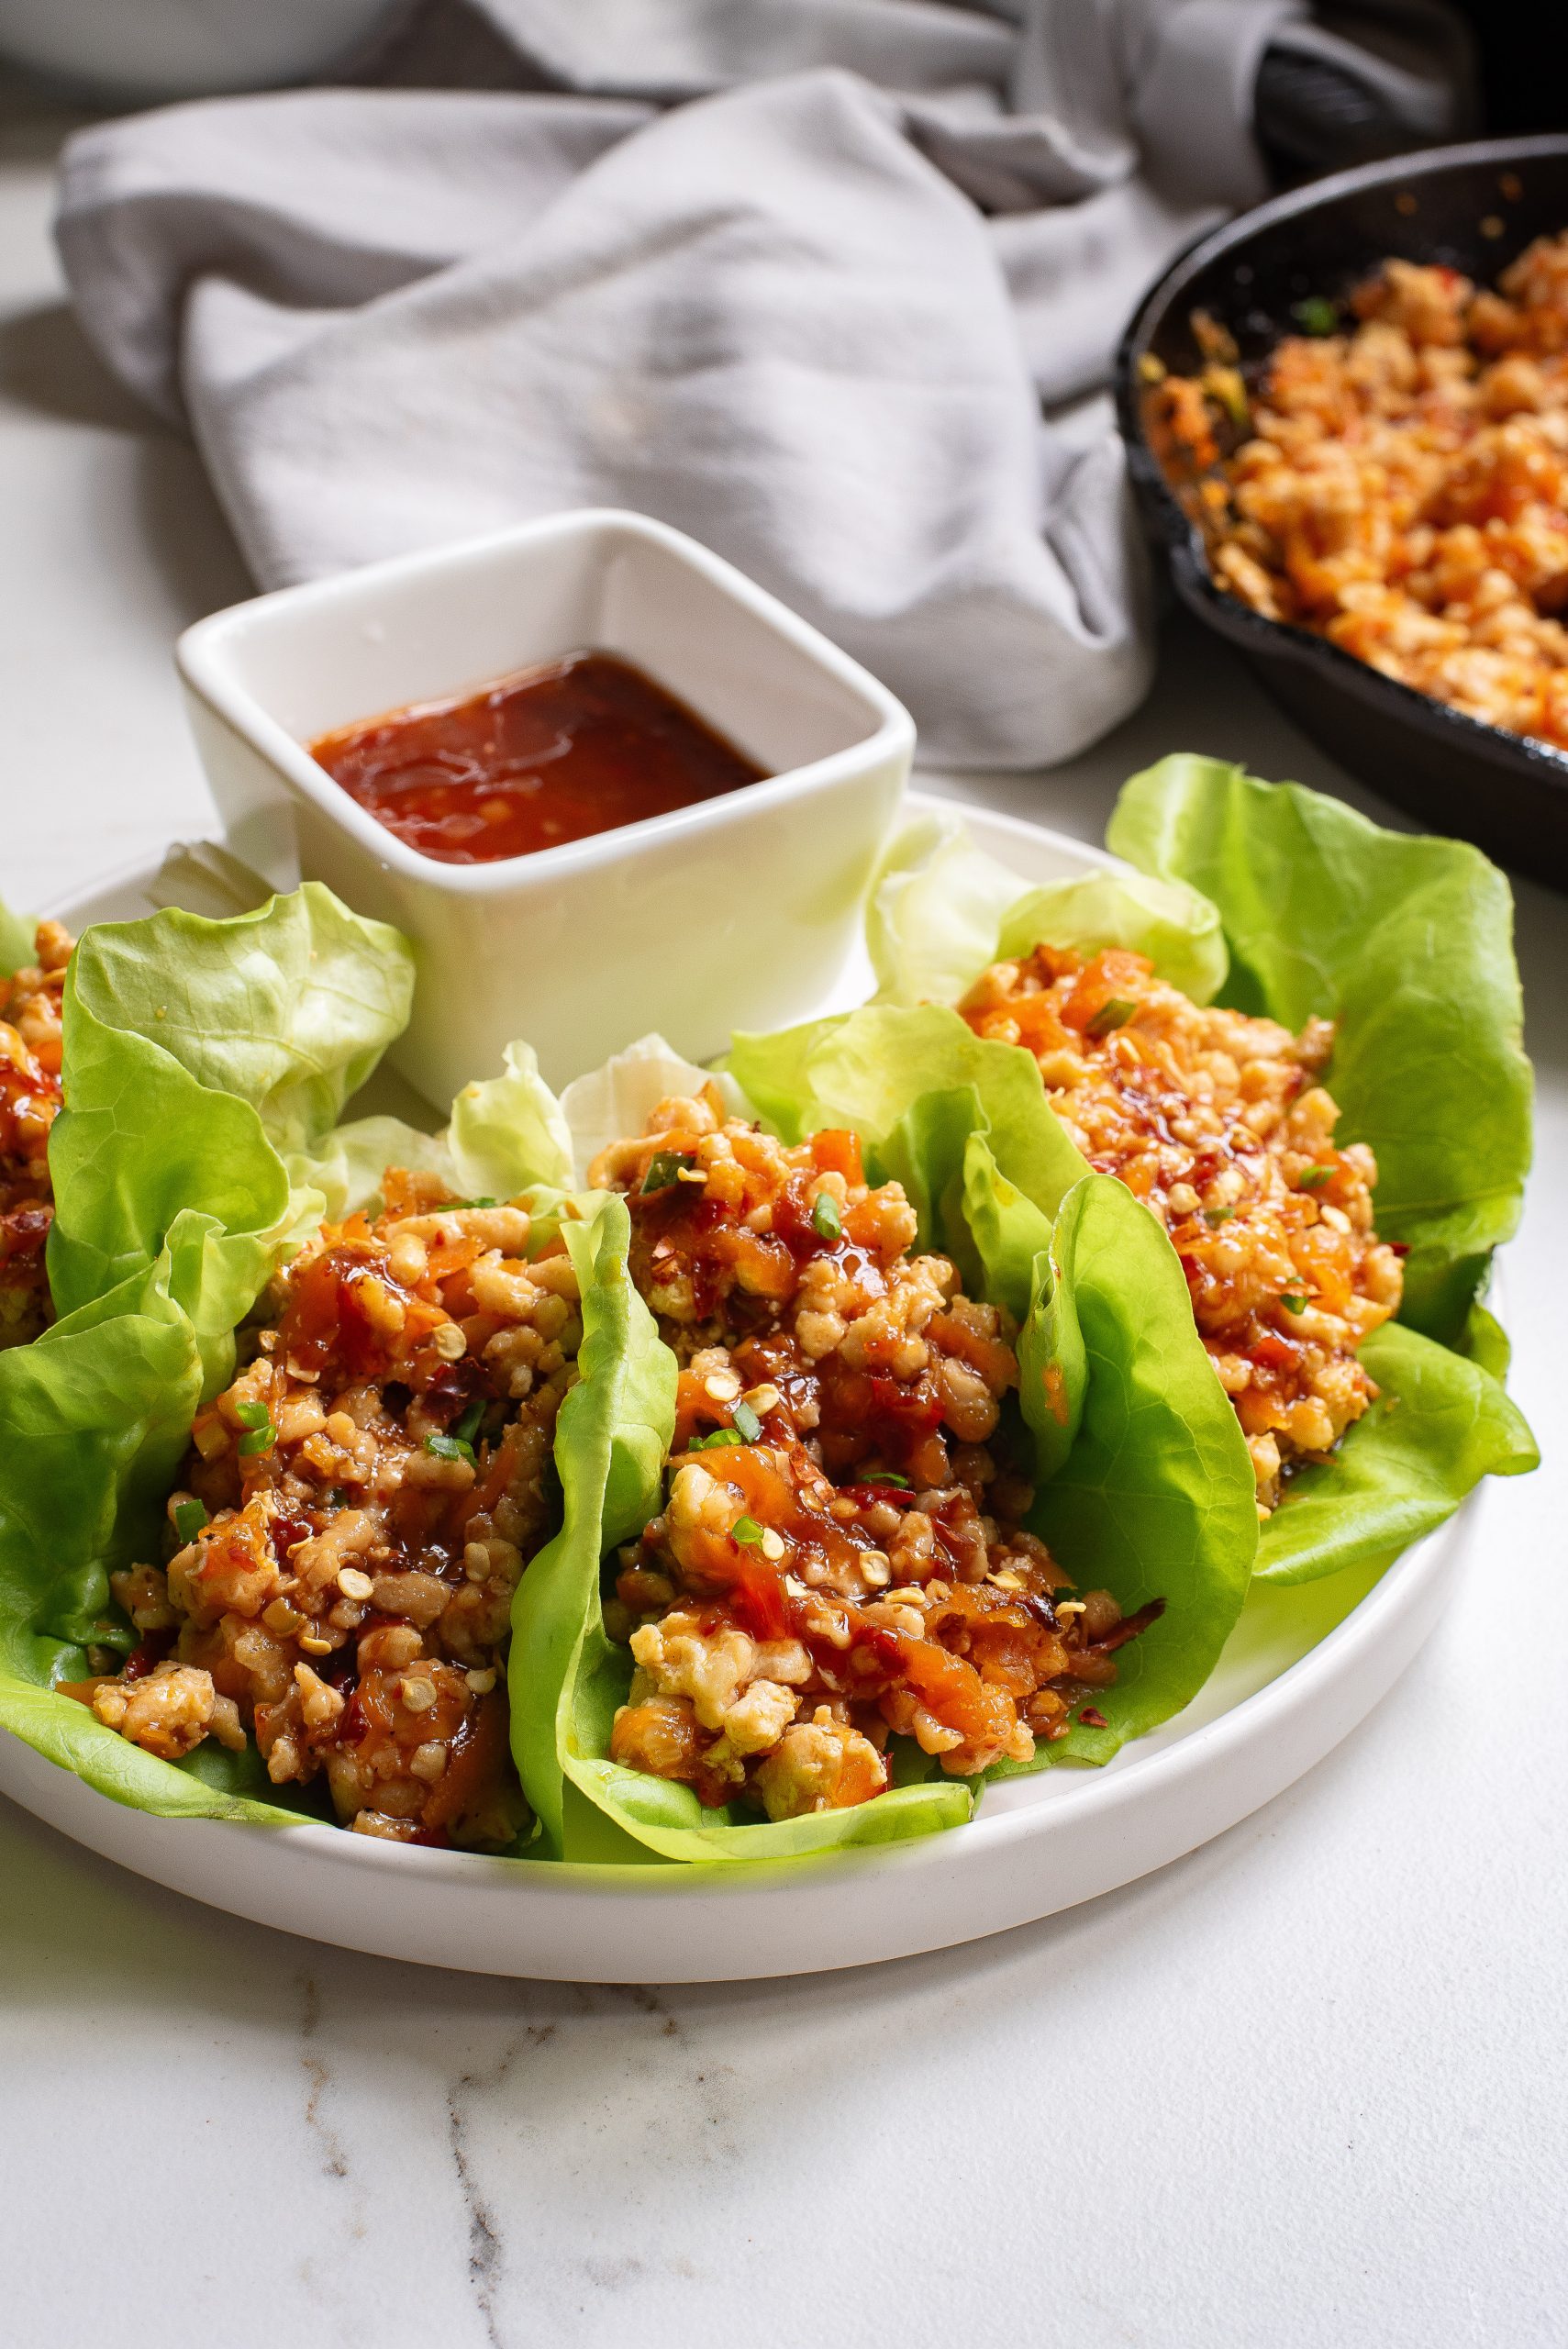 Lettuce filled with stir-fried ground meat and vegetables, served with a side of dipping sauce on a white plate.